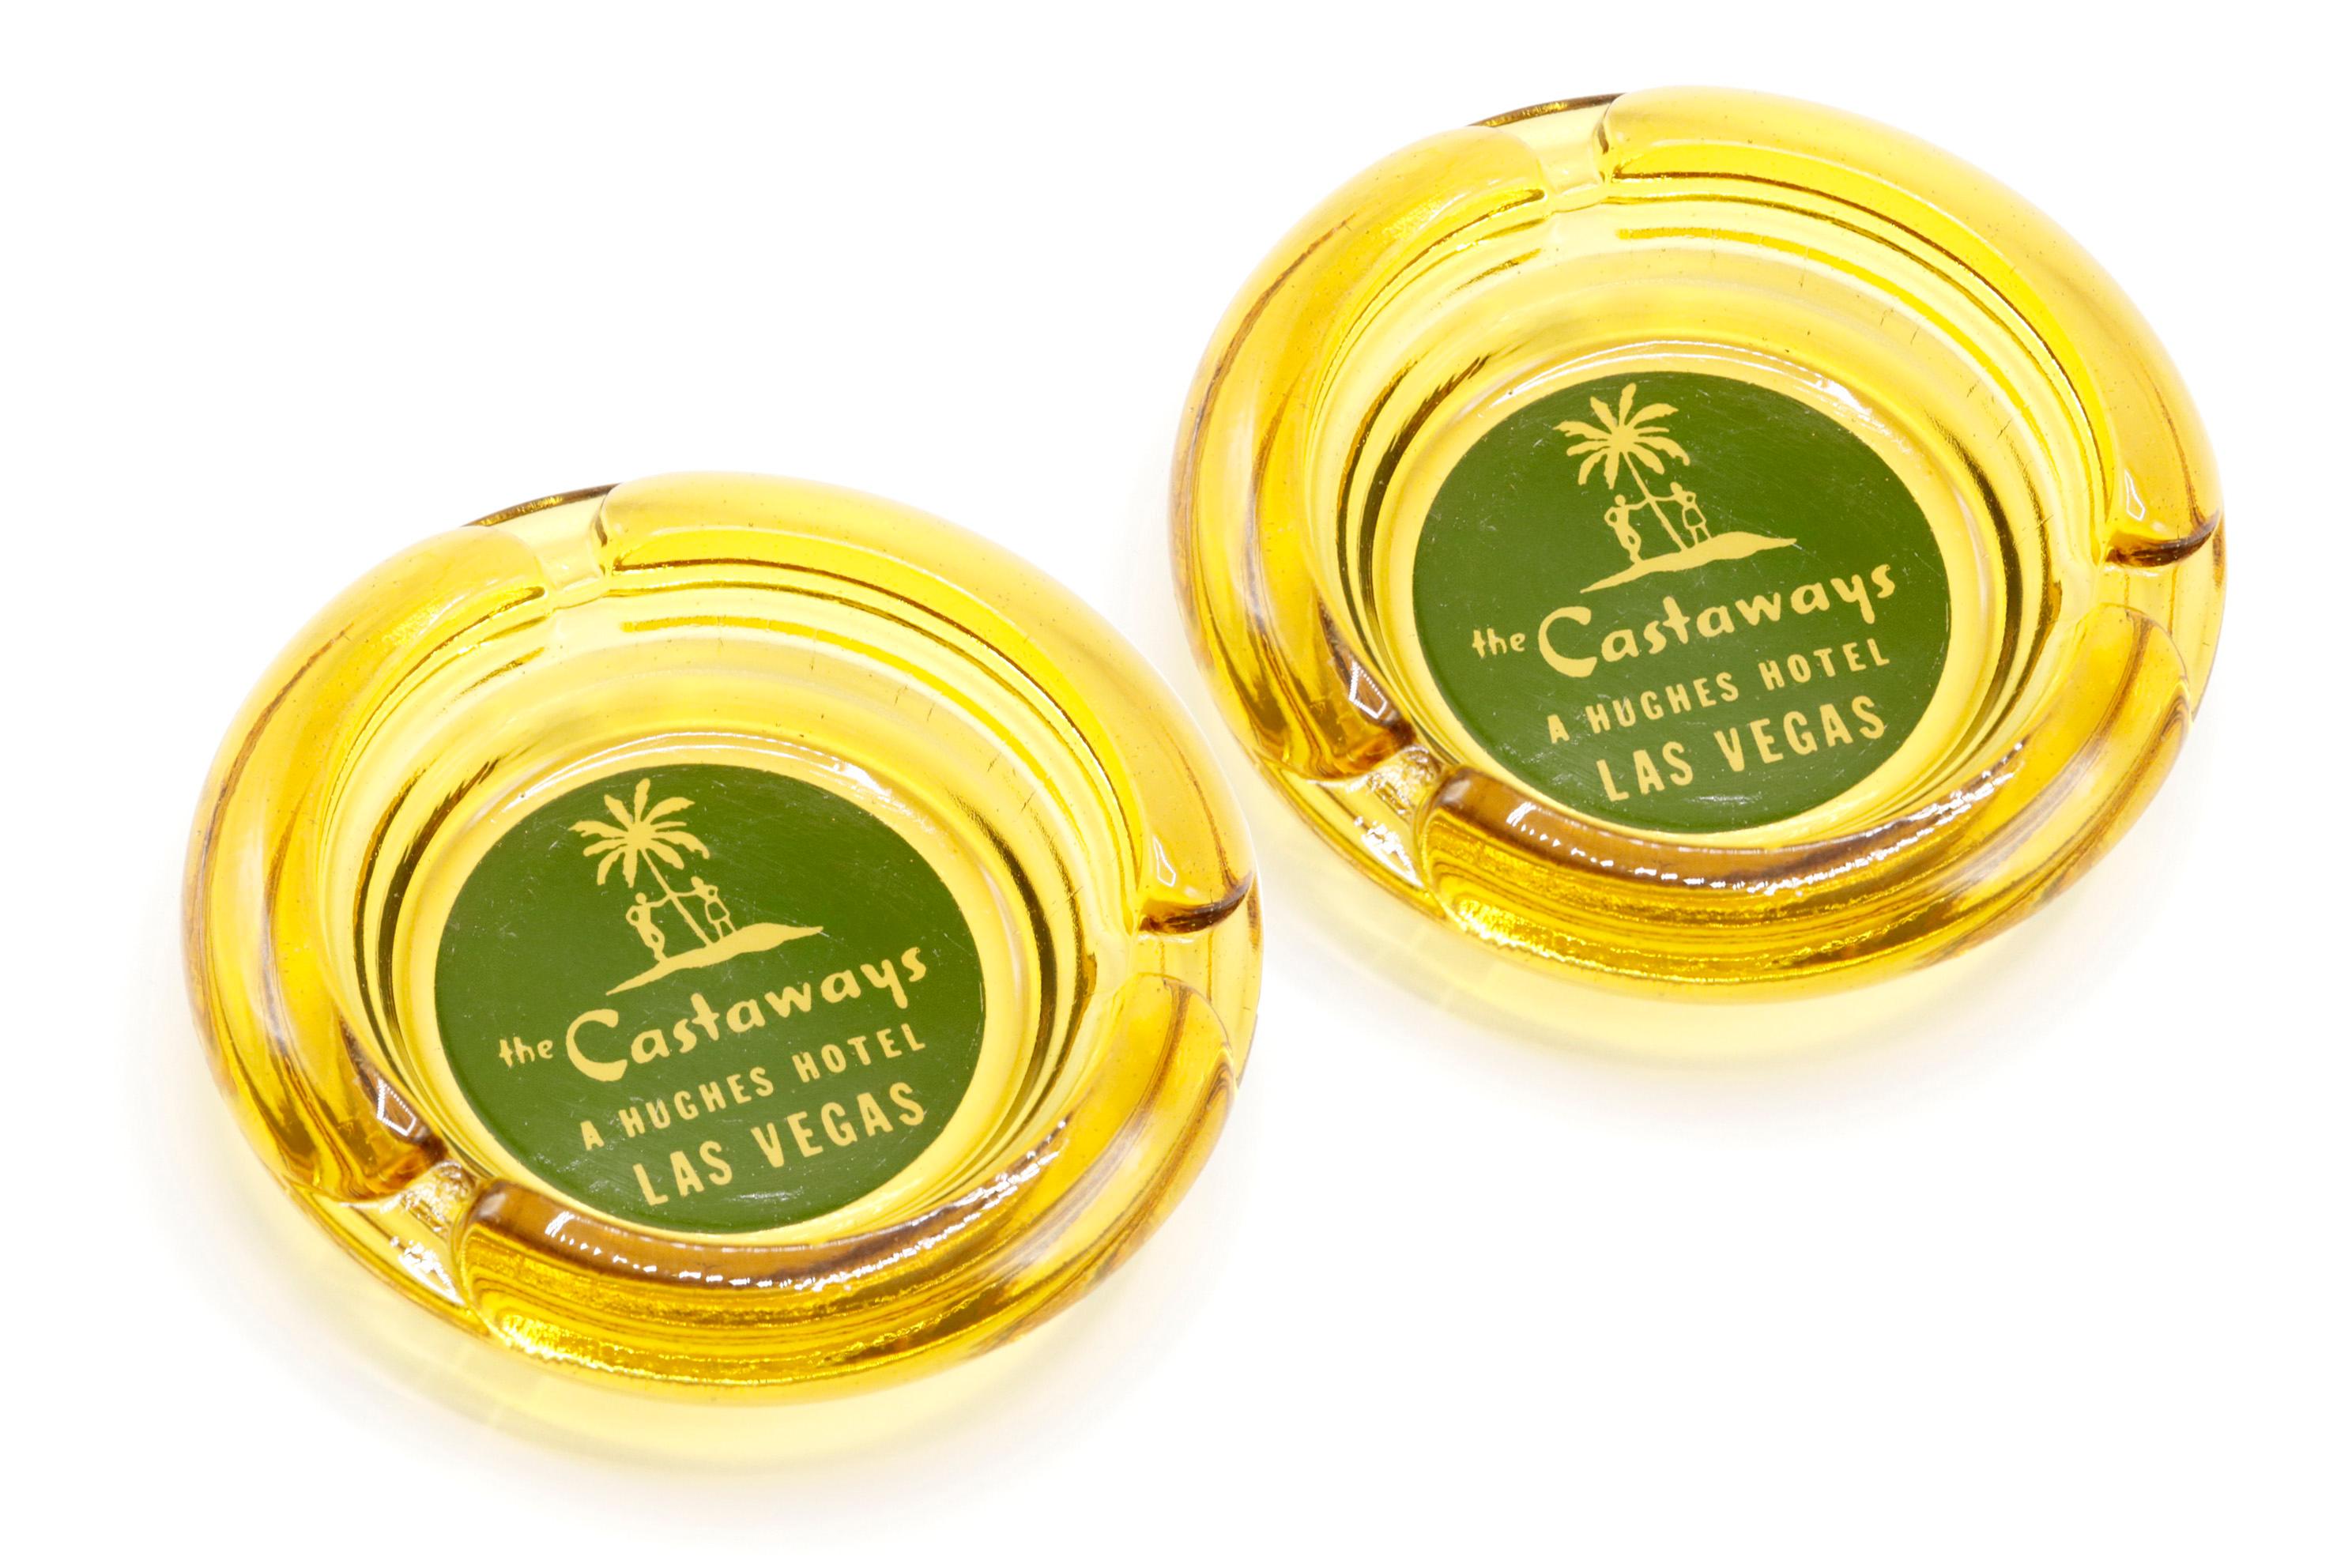 A pair of yellow glass ashtrays from The Castaways Hotel, a hotel and casino in Paradise, Las Vegas, Nevada. The center is printed with a green circle branded with the Castaways logo. The hotel, permanently closed in 1987, was opened in 1963 and